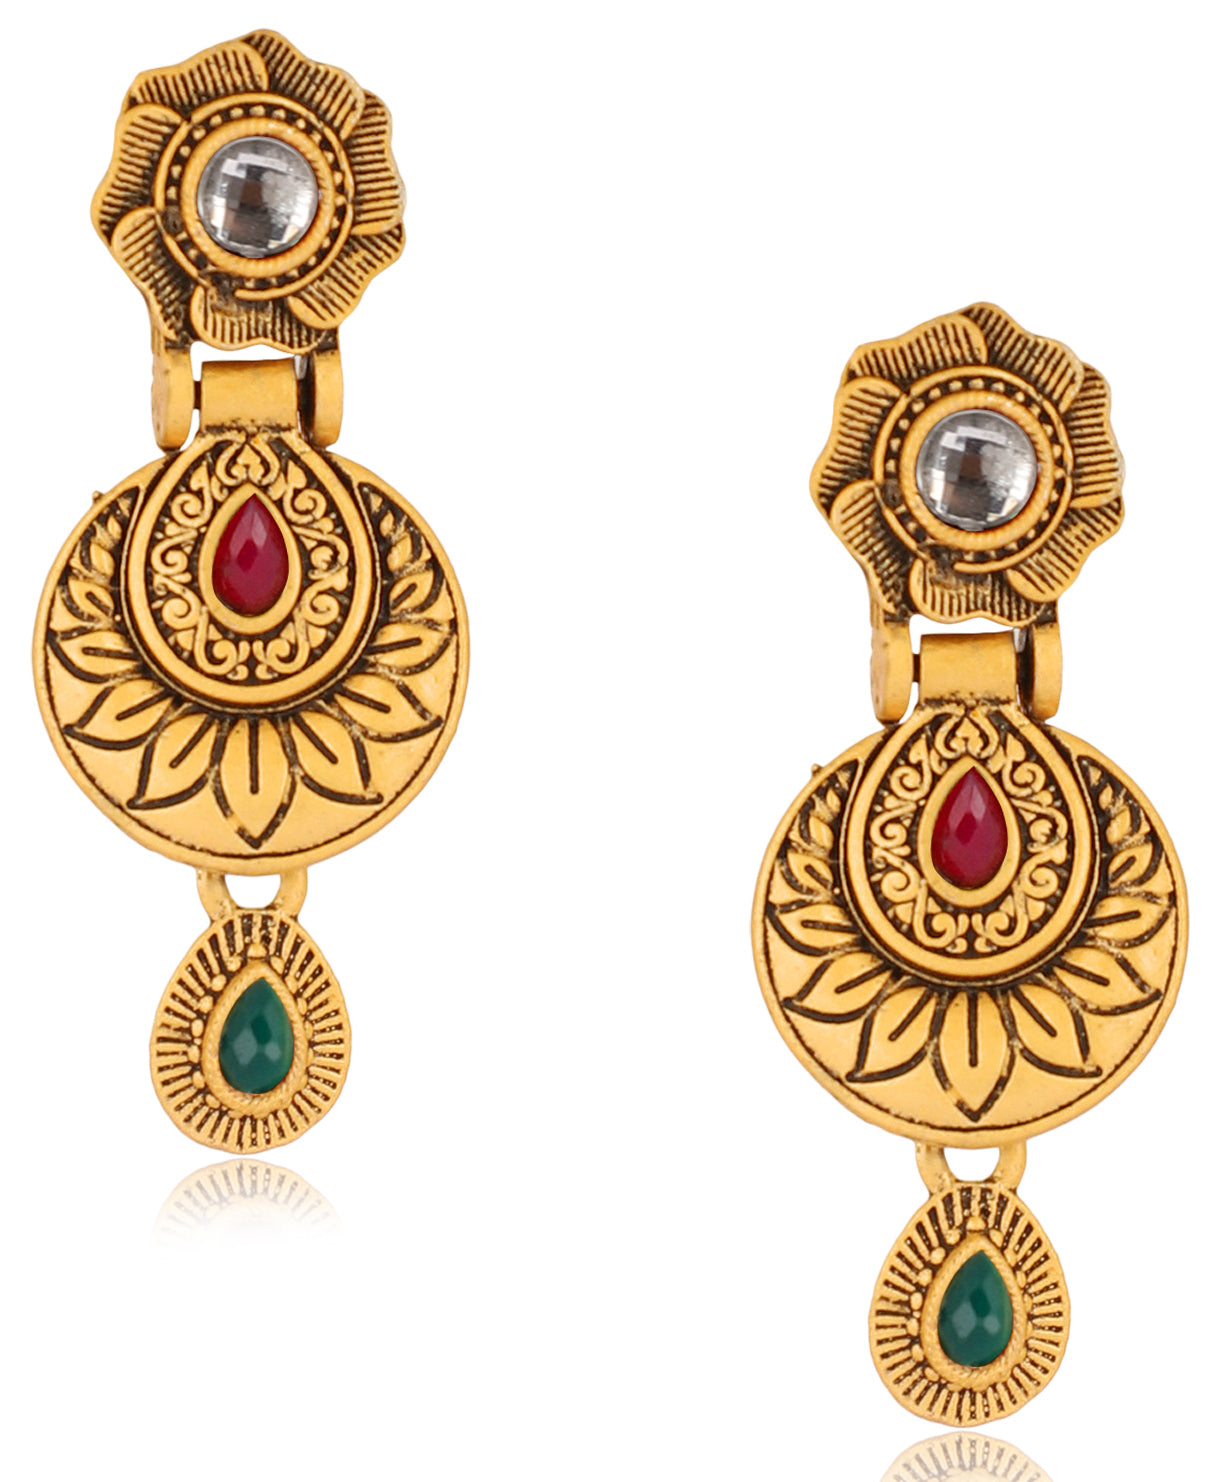 Mekkna Designed Handcrafted Gold Plated Necklace | Buy This Jewellery set Online from Mekkna